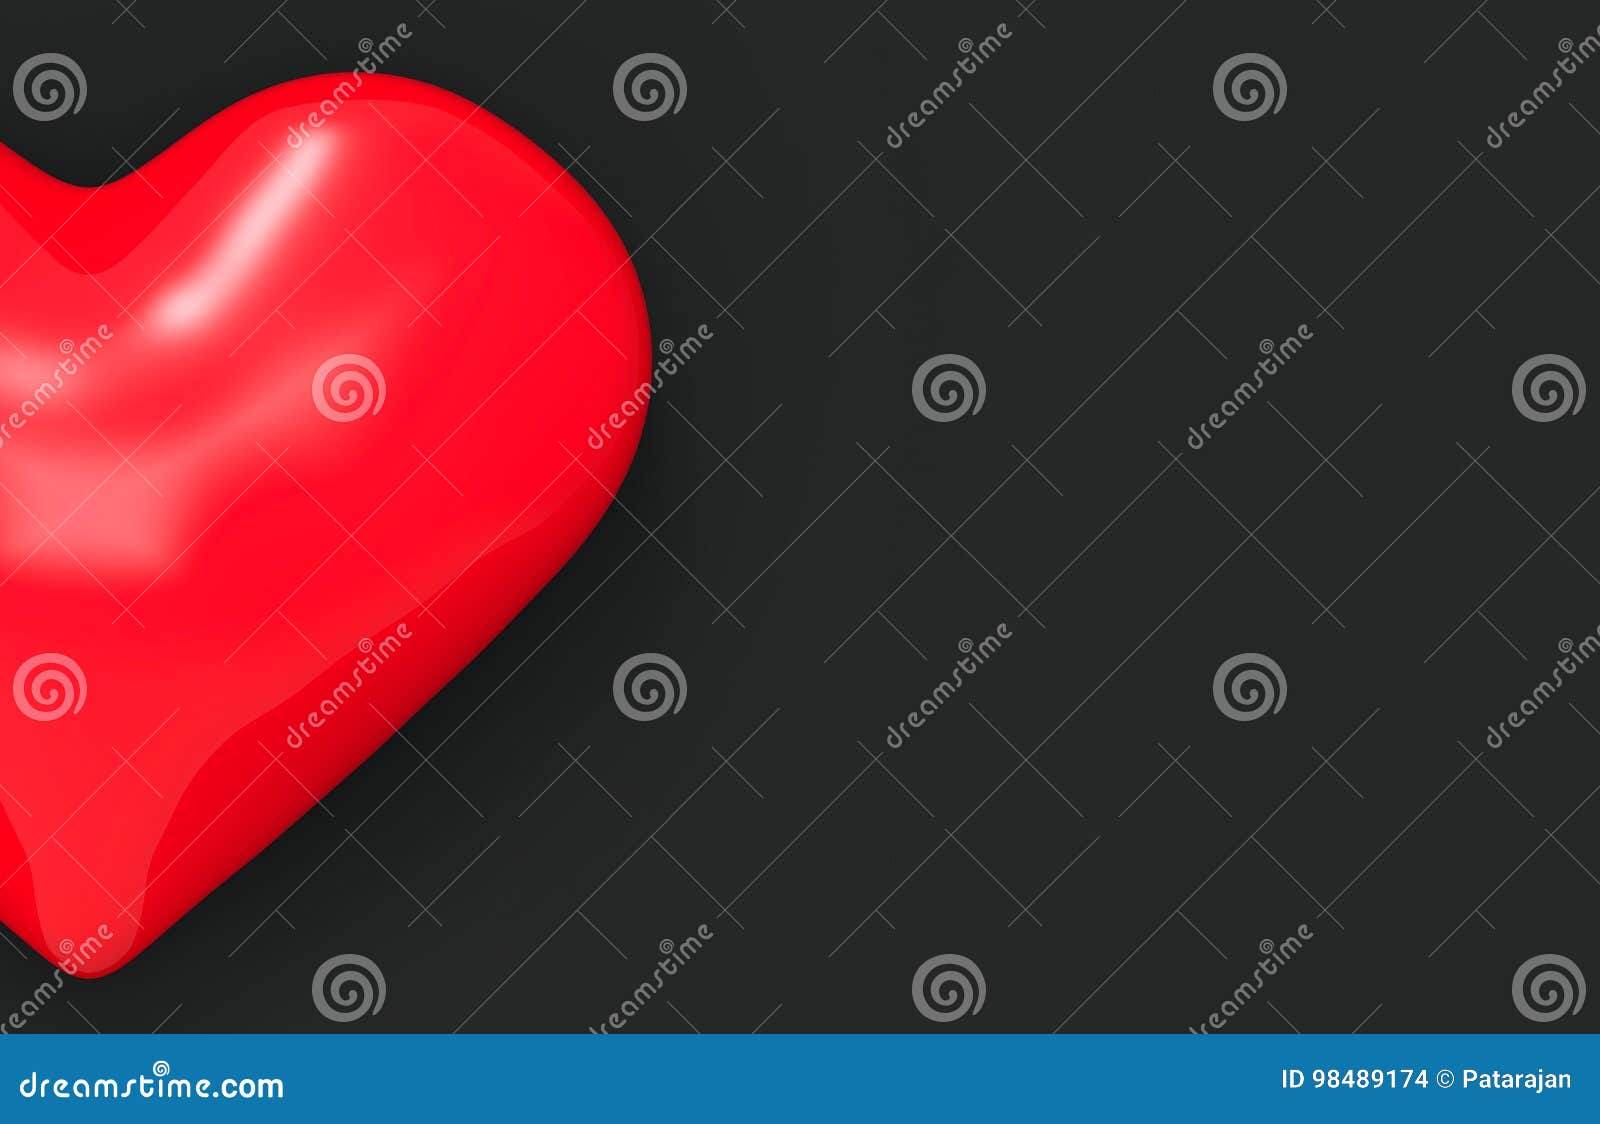 Half Of One Sweet Red Heart On Black Background With Copy Space